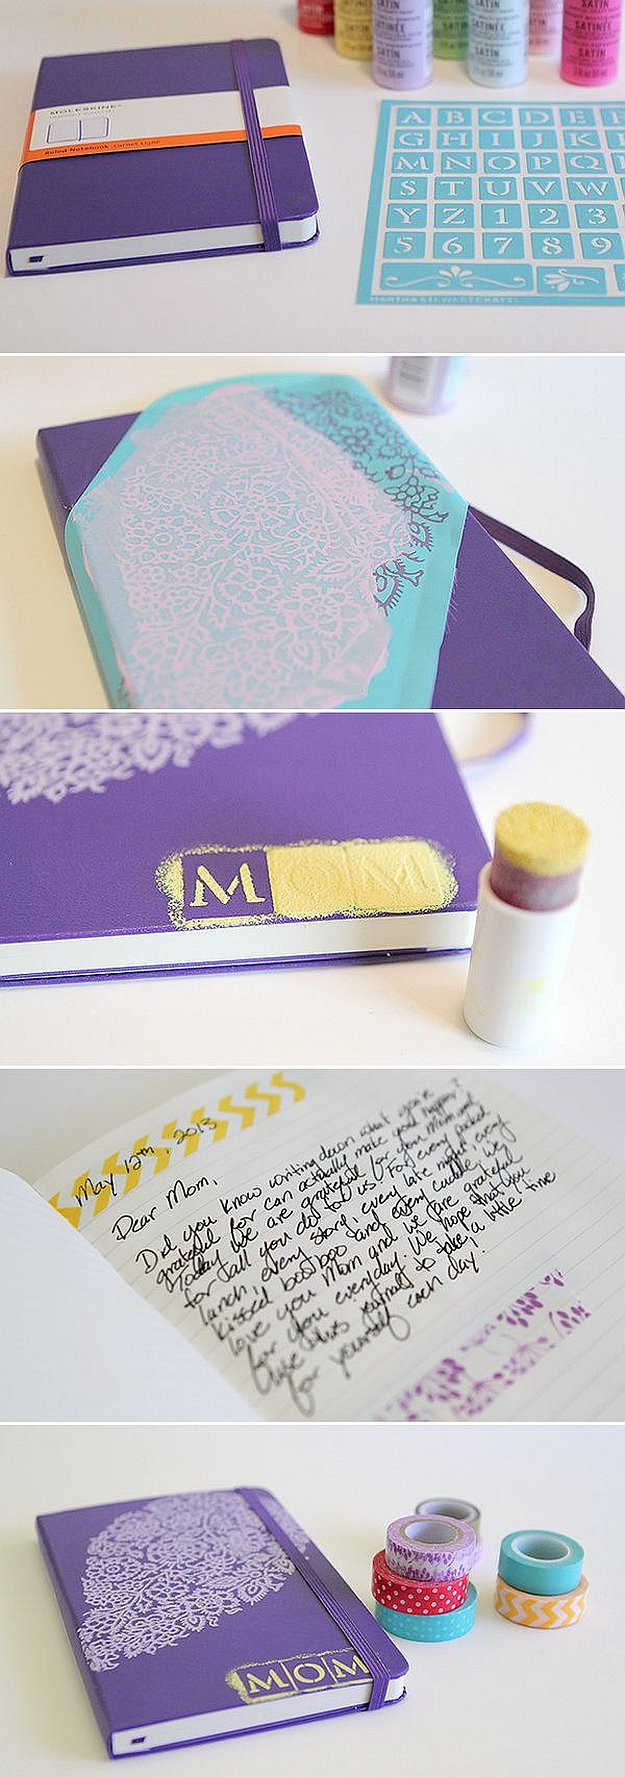 Gift Ideas For Mothers
 10 DIY Birthday Gift Ideas for Mom DIY Ready